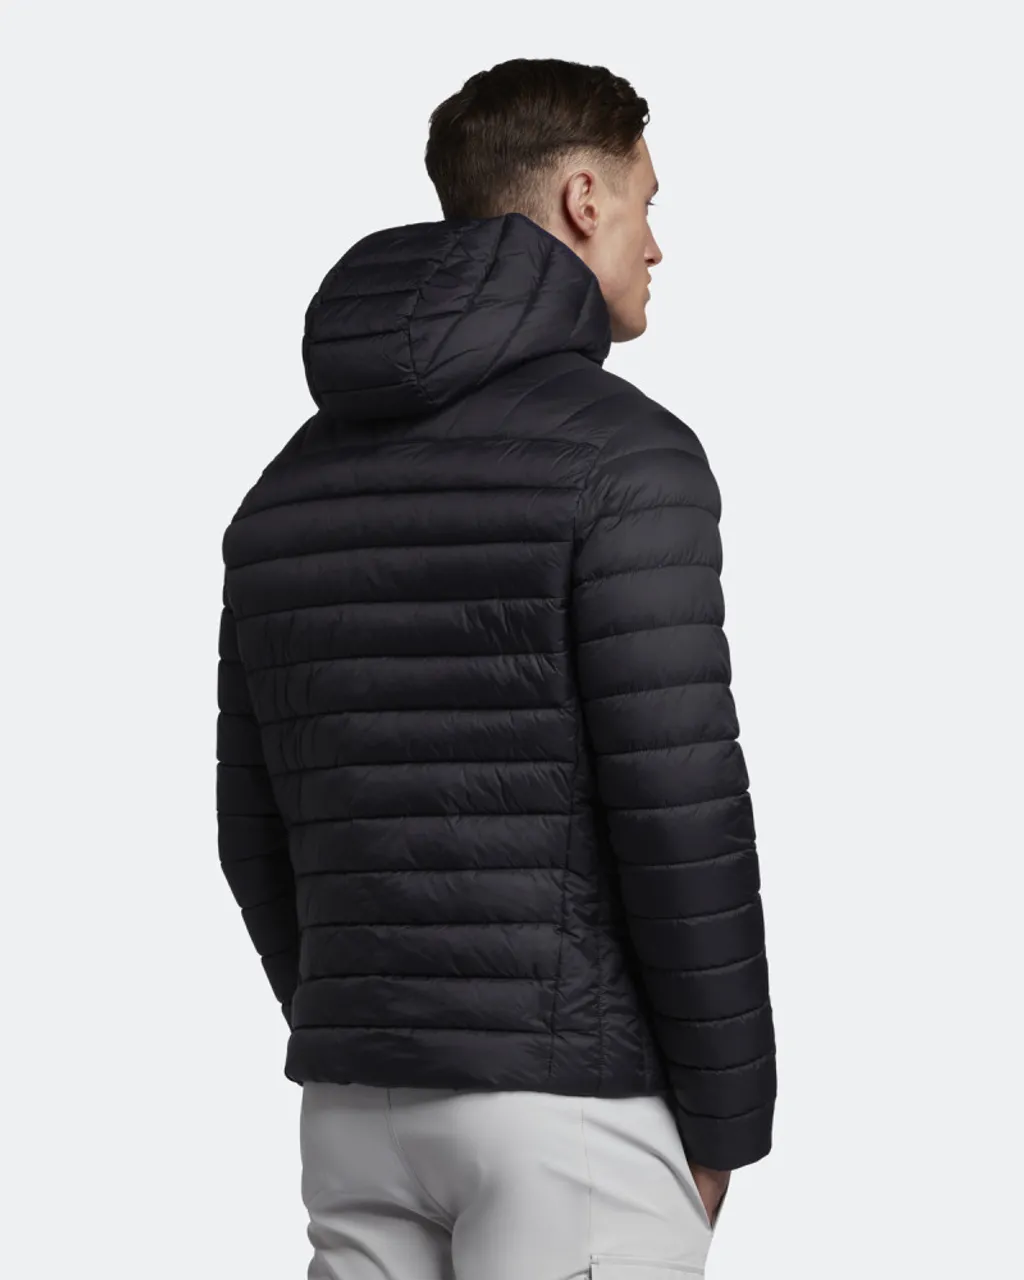 Lyle and Scott Lightweight quilted